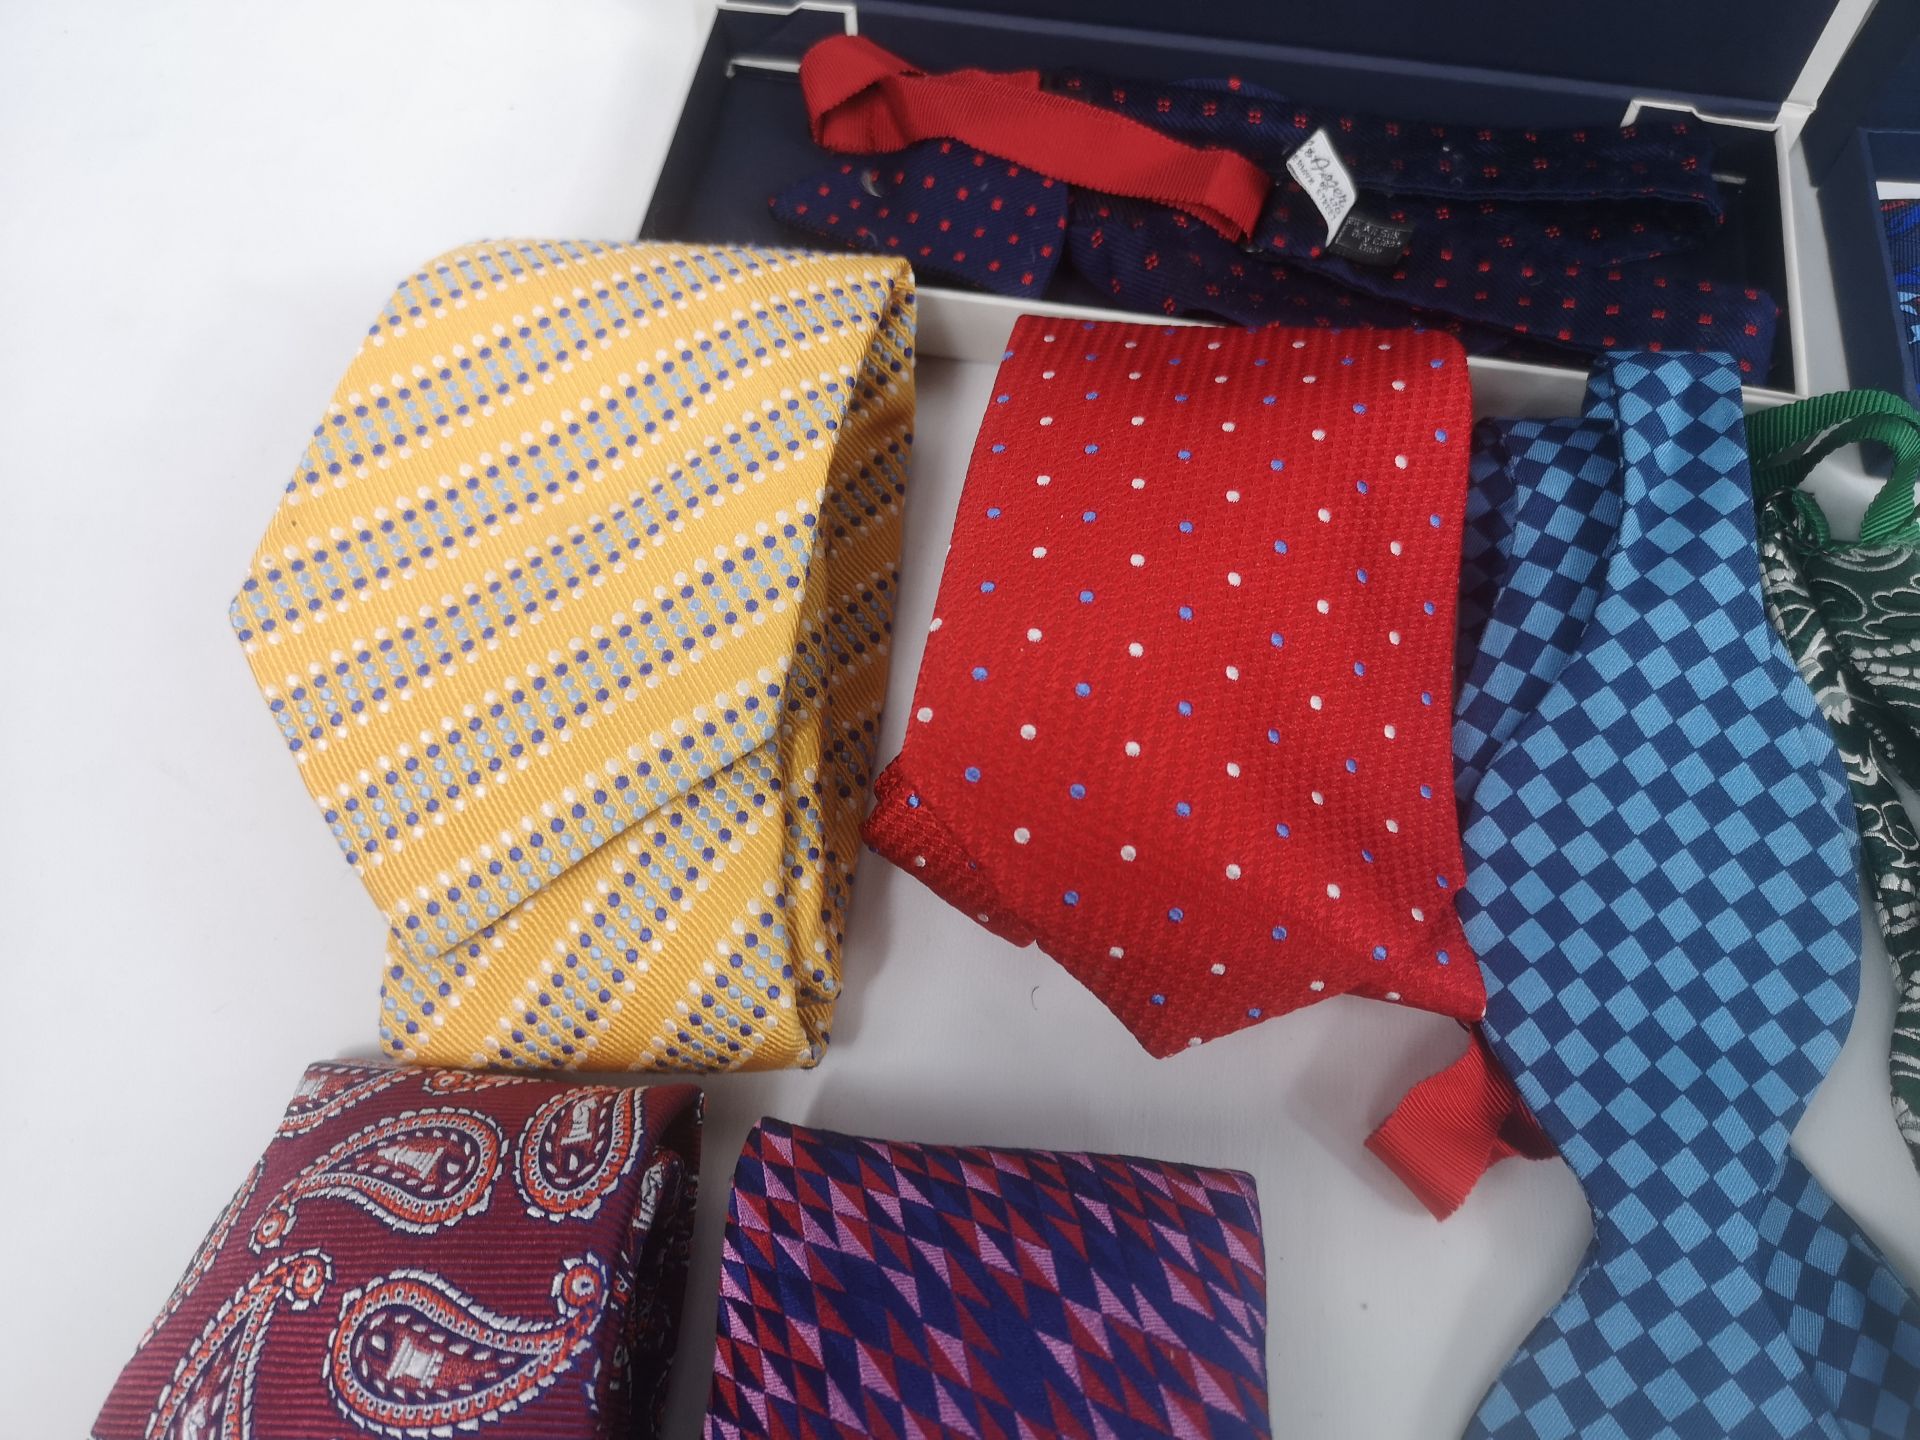 Eight Turnbull and Asser silk ties together with a quantity of Turnbull and Asser bow ties - Image 4 of 5